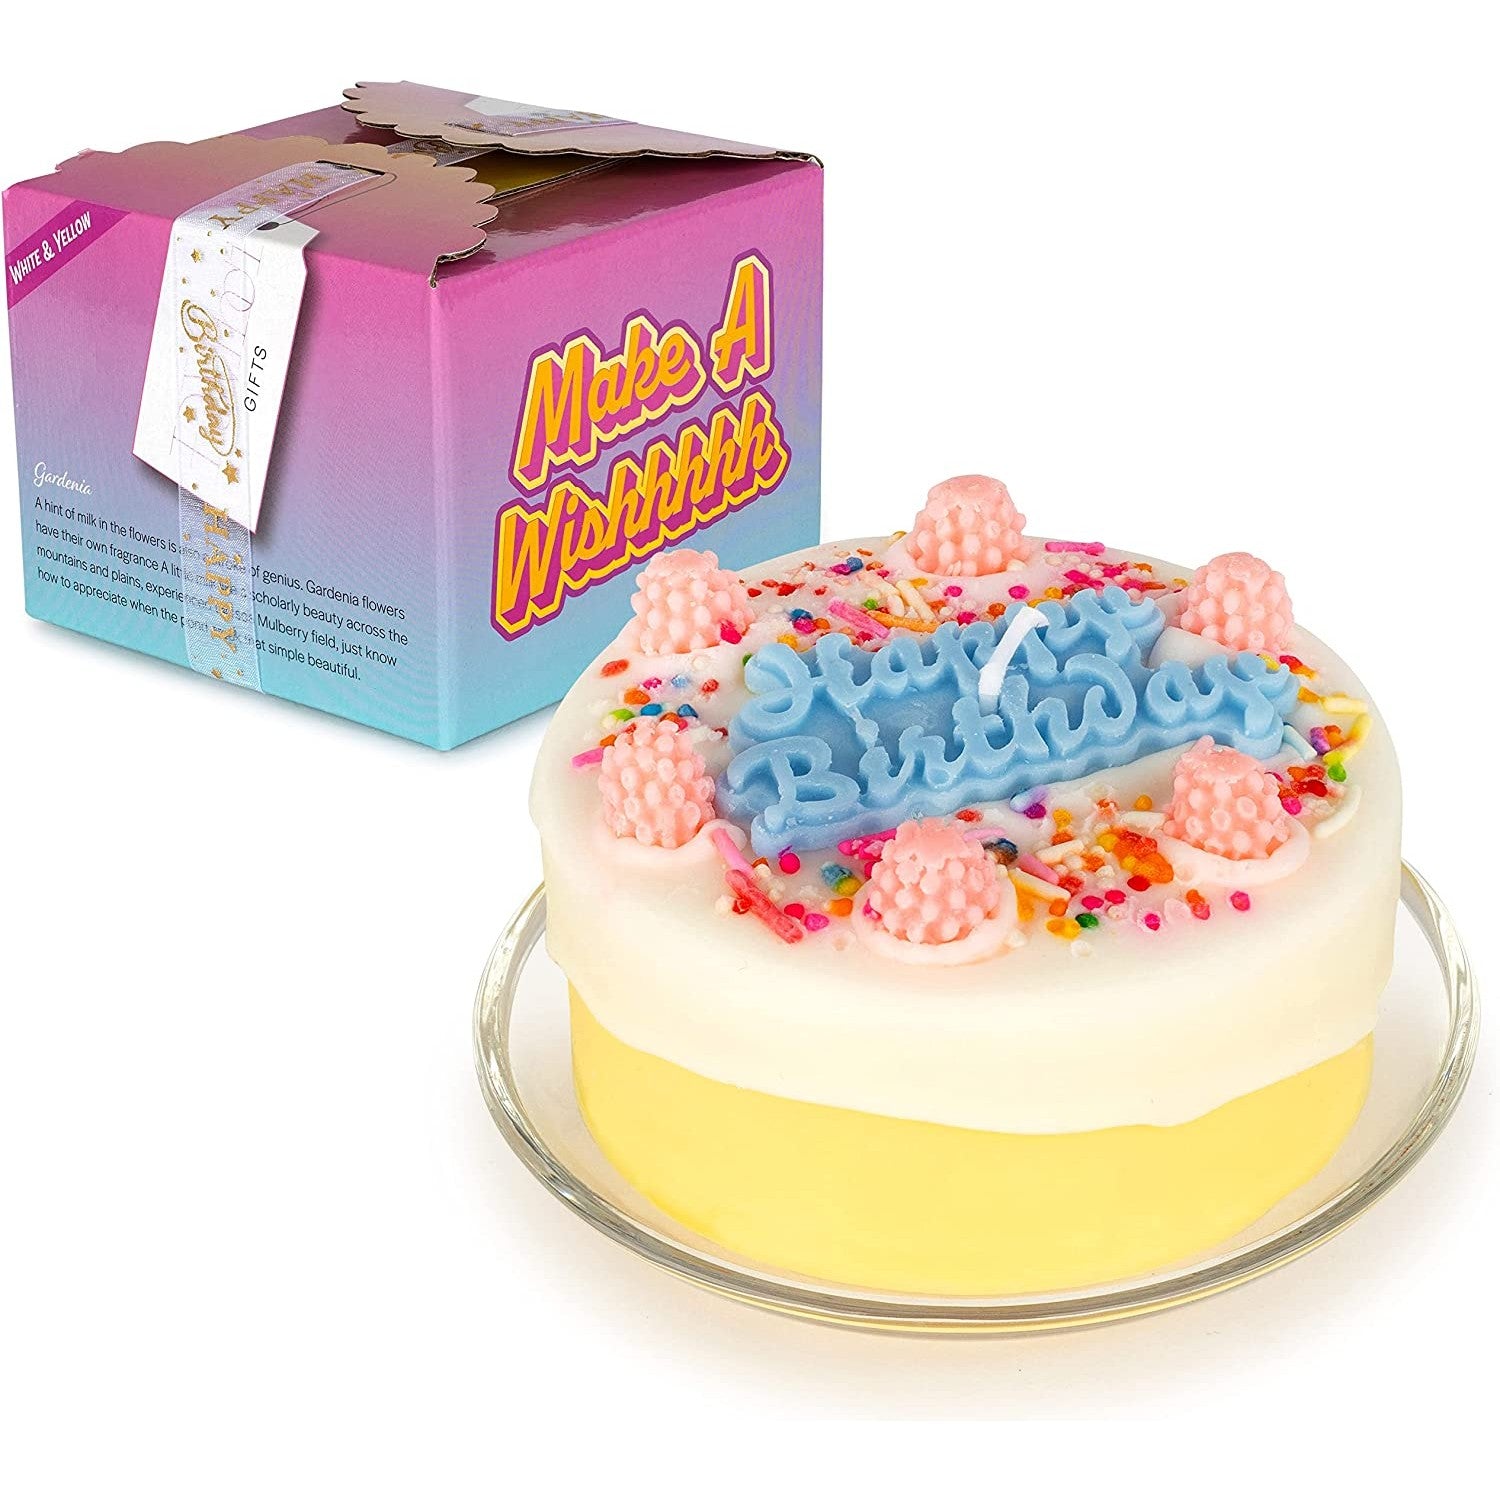 A candle which is shaped like a birthday cake with white frosting and happy birthday written on the top of it. It also comes with its own blue and purple gift box.